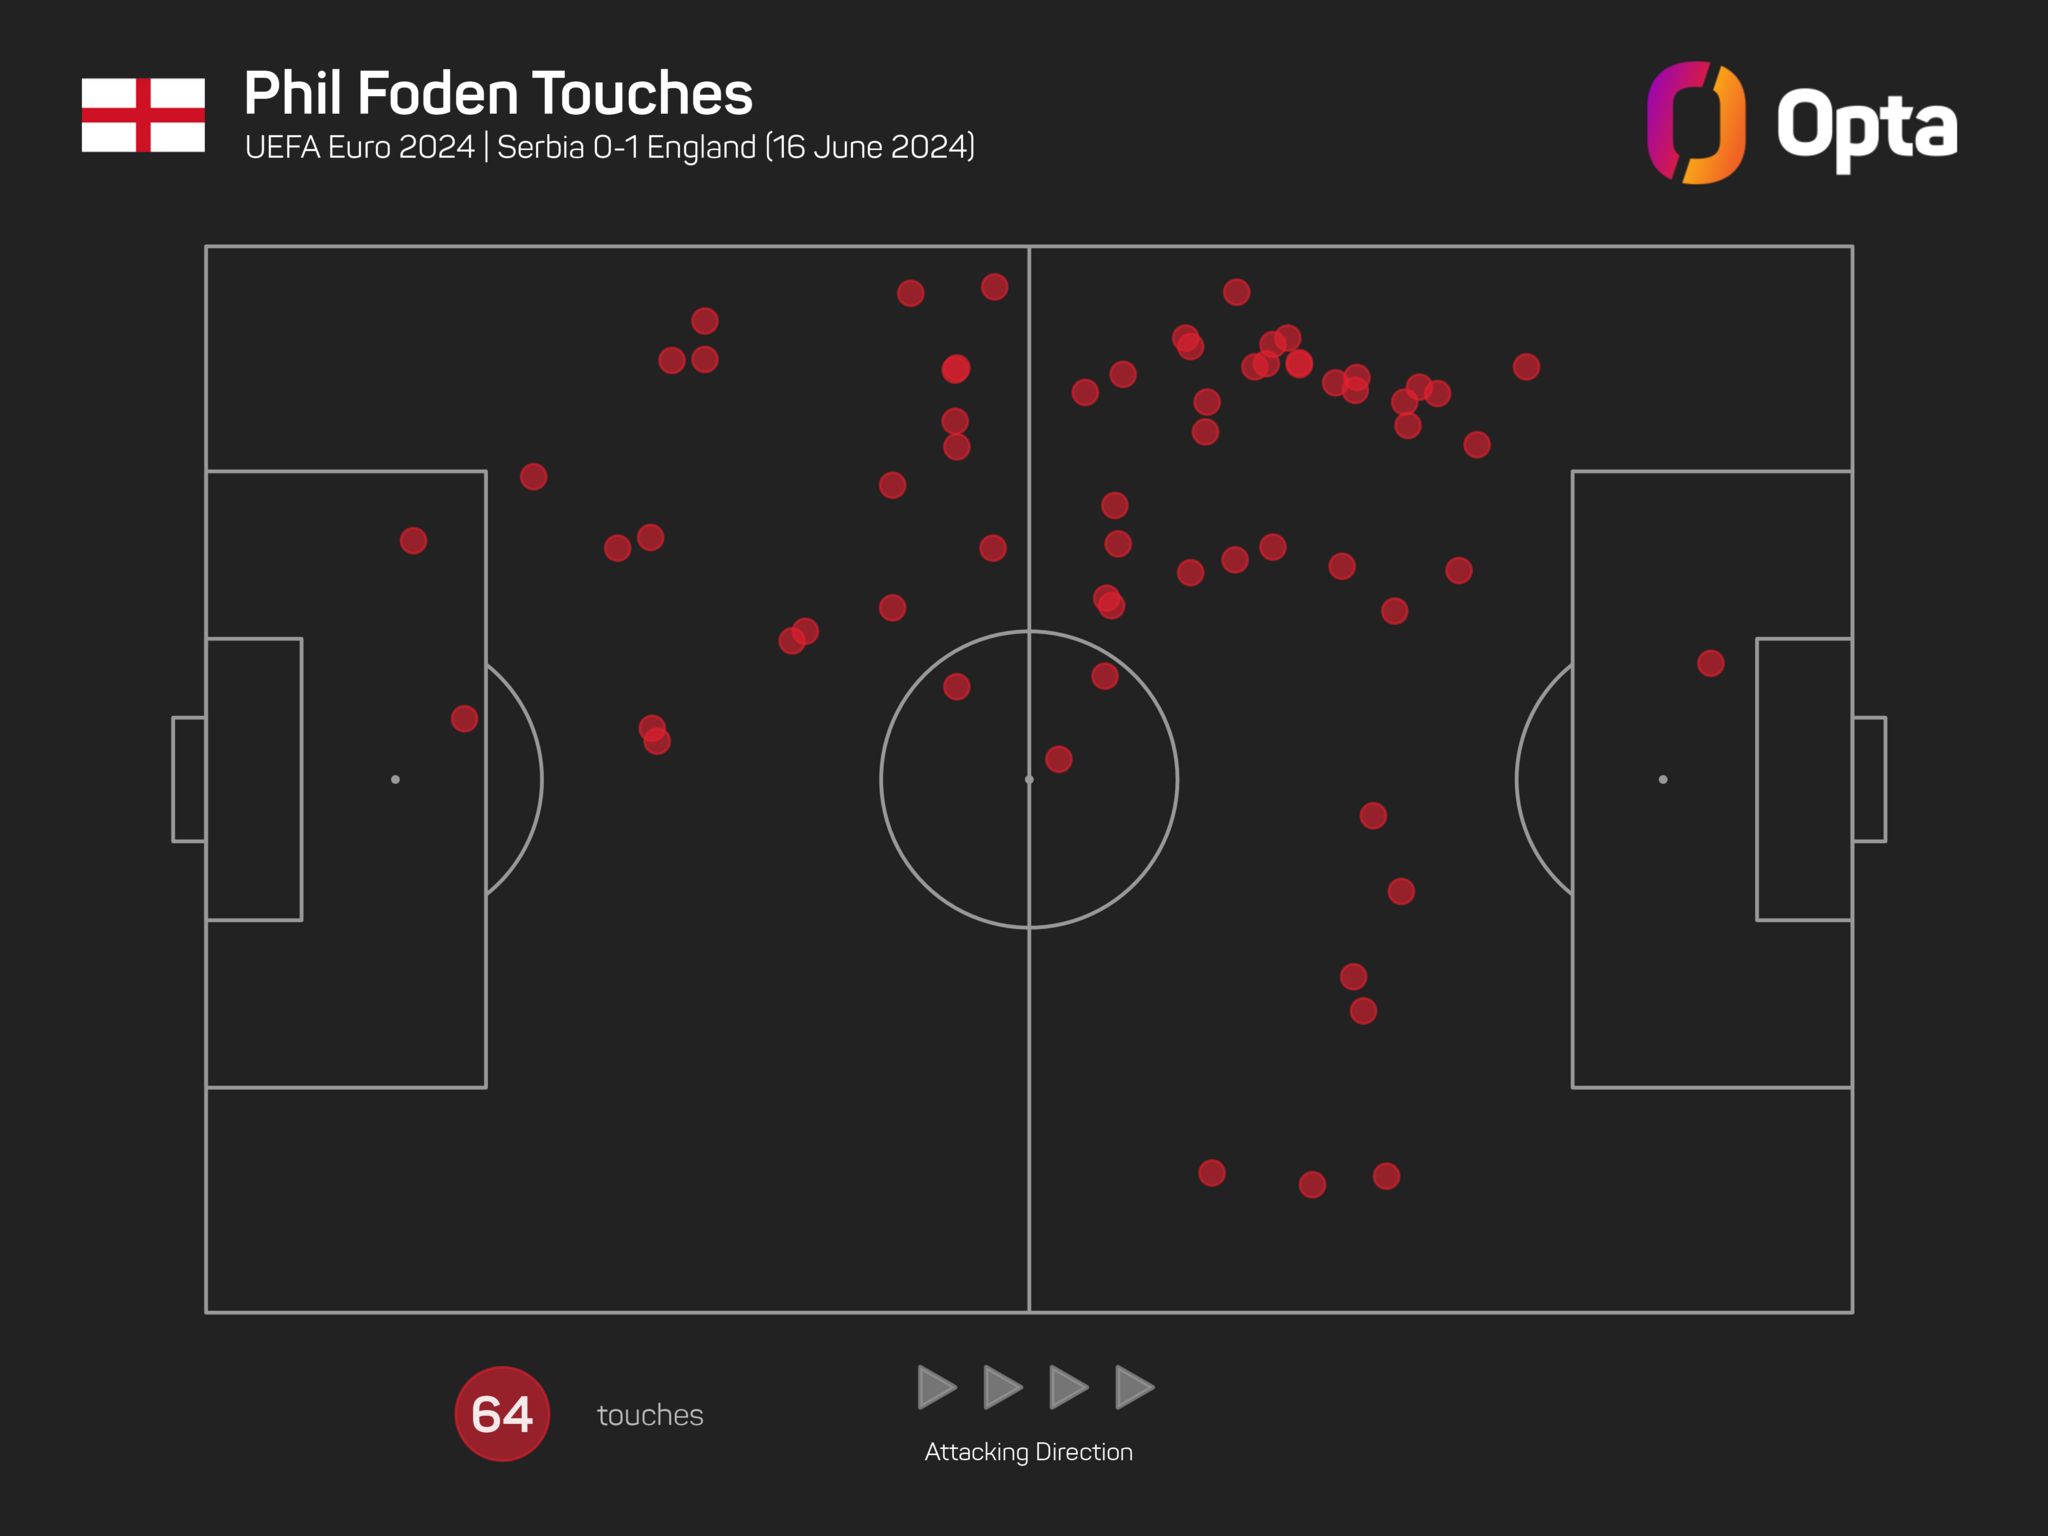 Phil Foden's touch map against Serbia